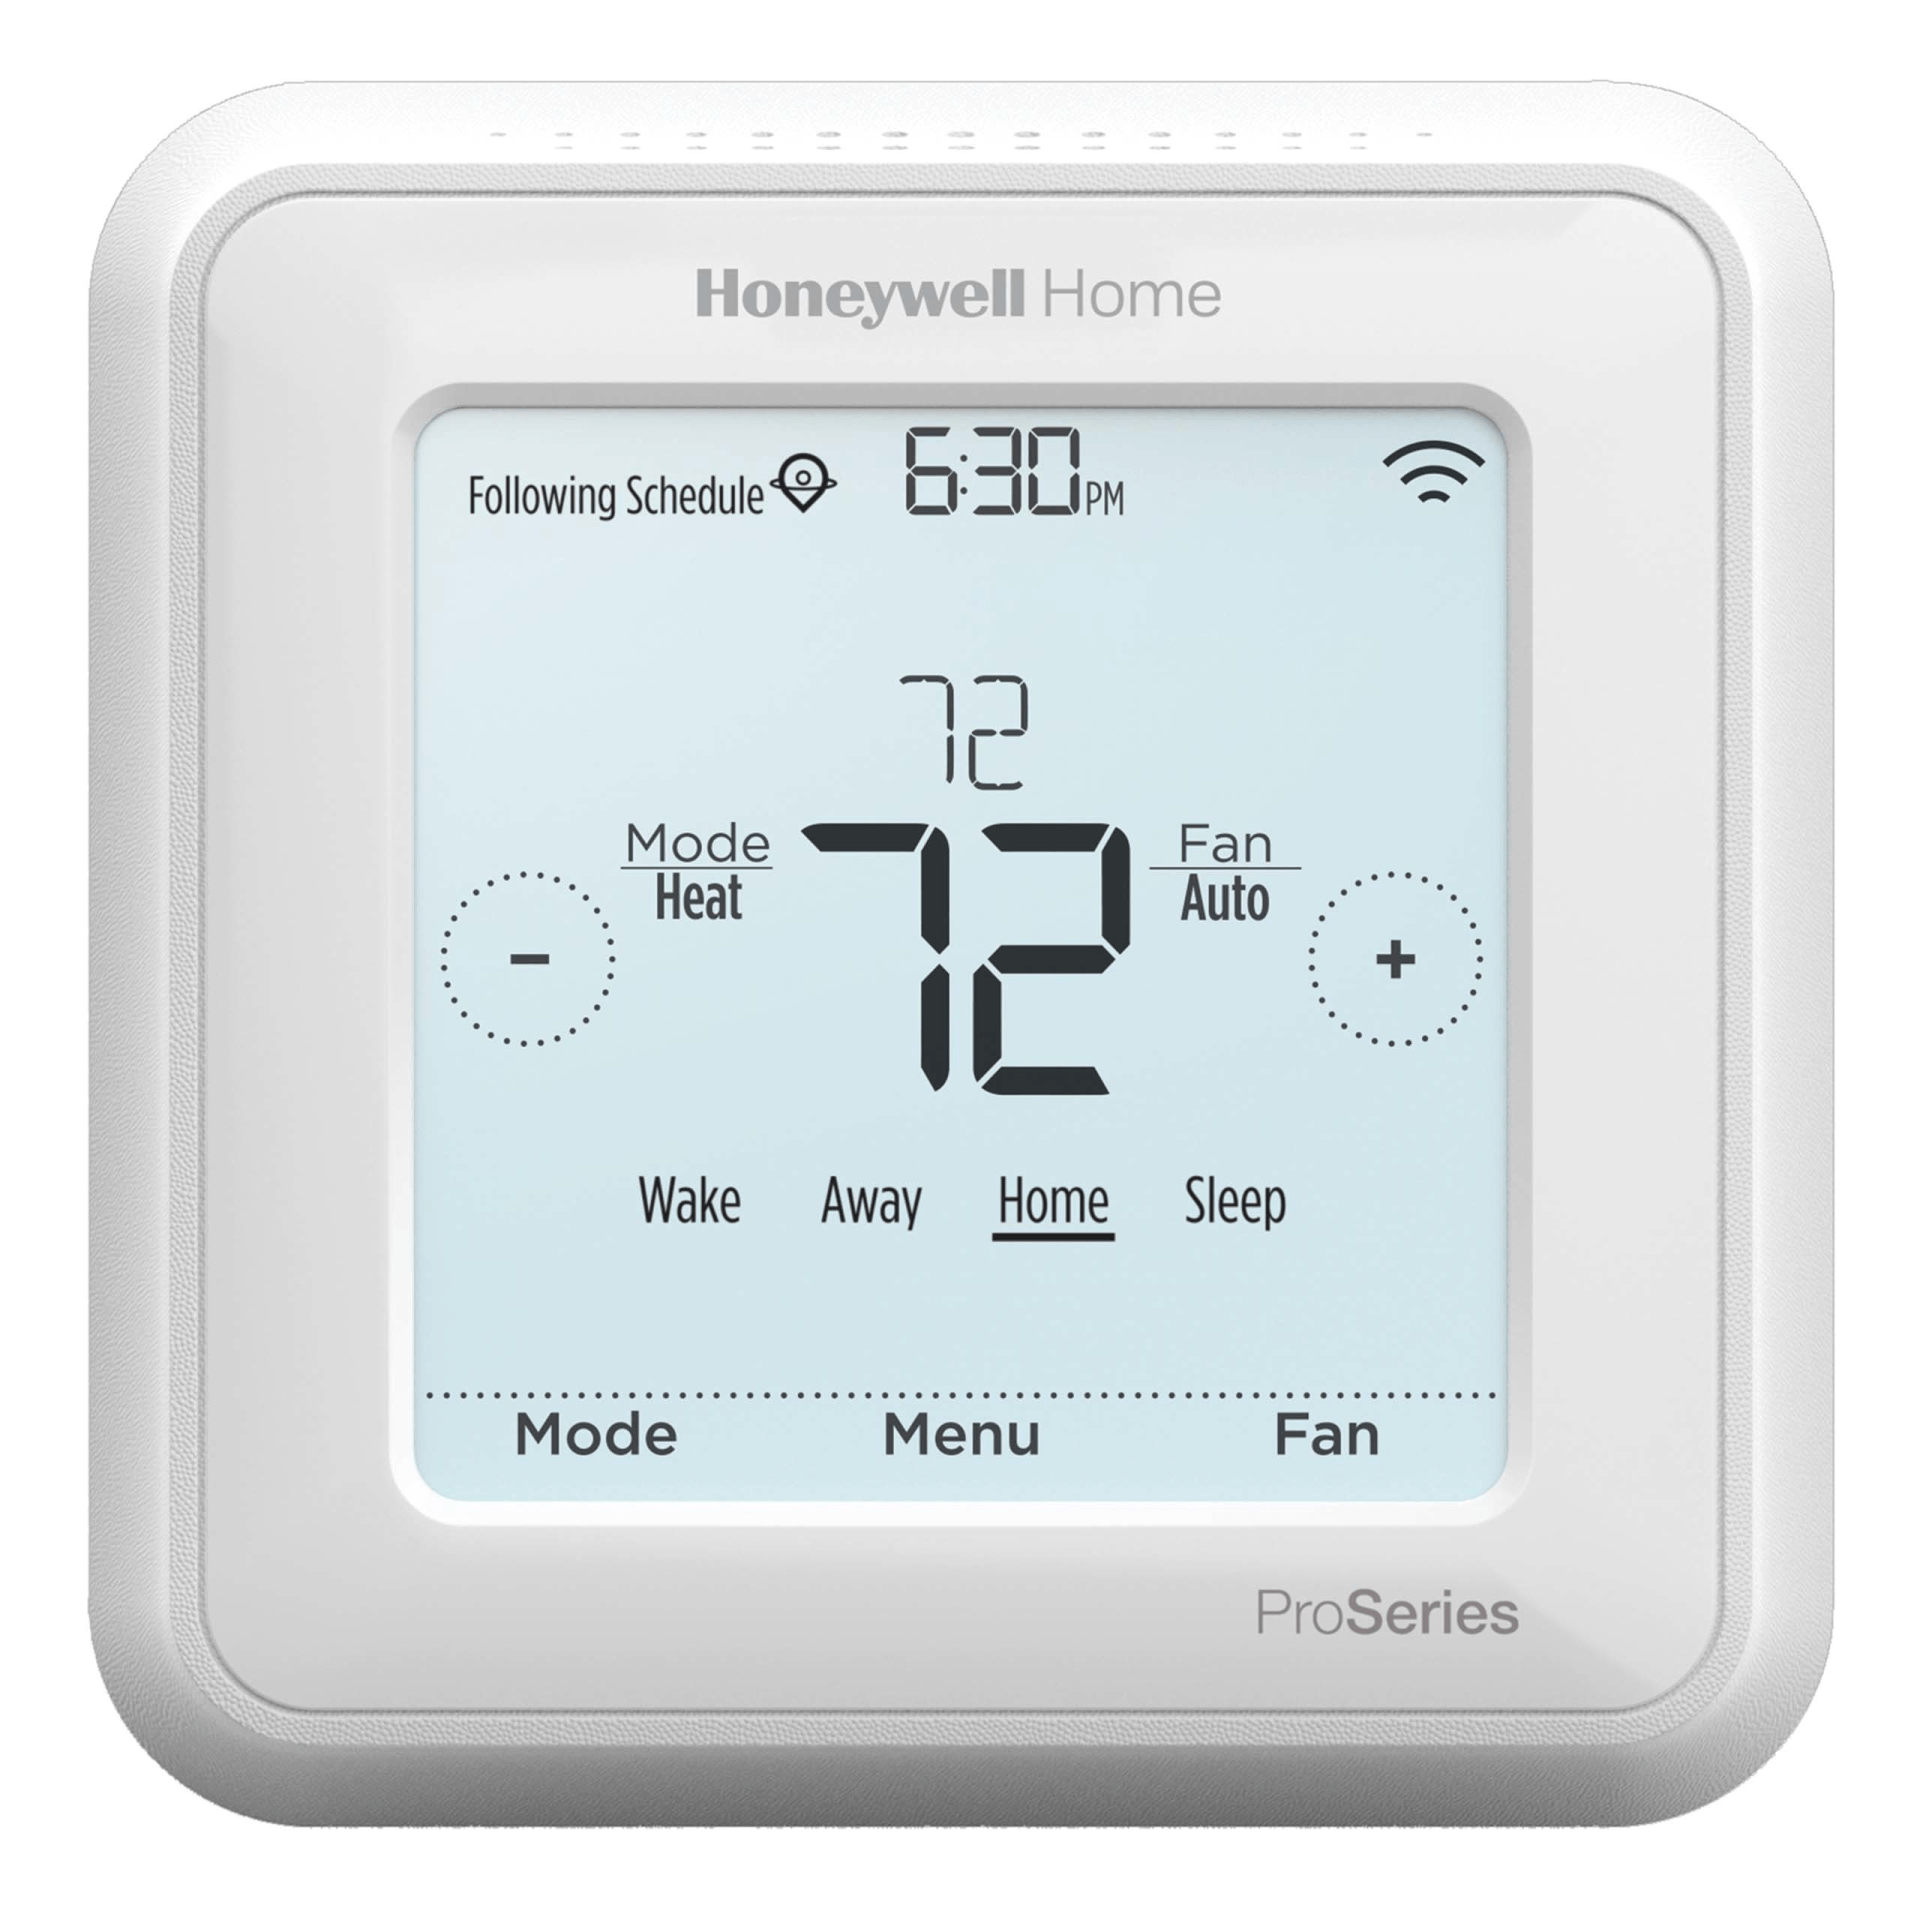 Home Comfort Automation Product — Palatine, IL — Vanguard Heating & Air Conditioning Inc.